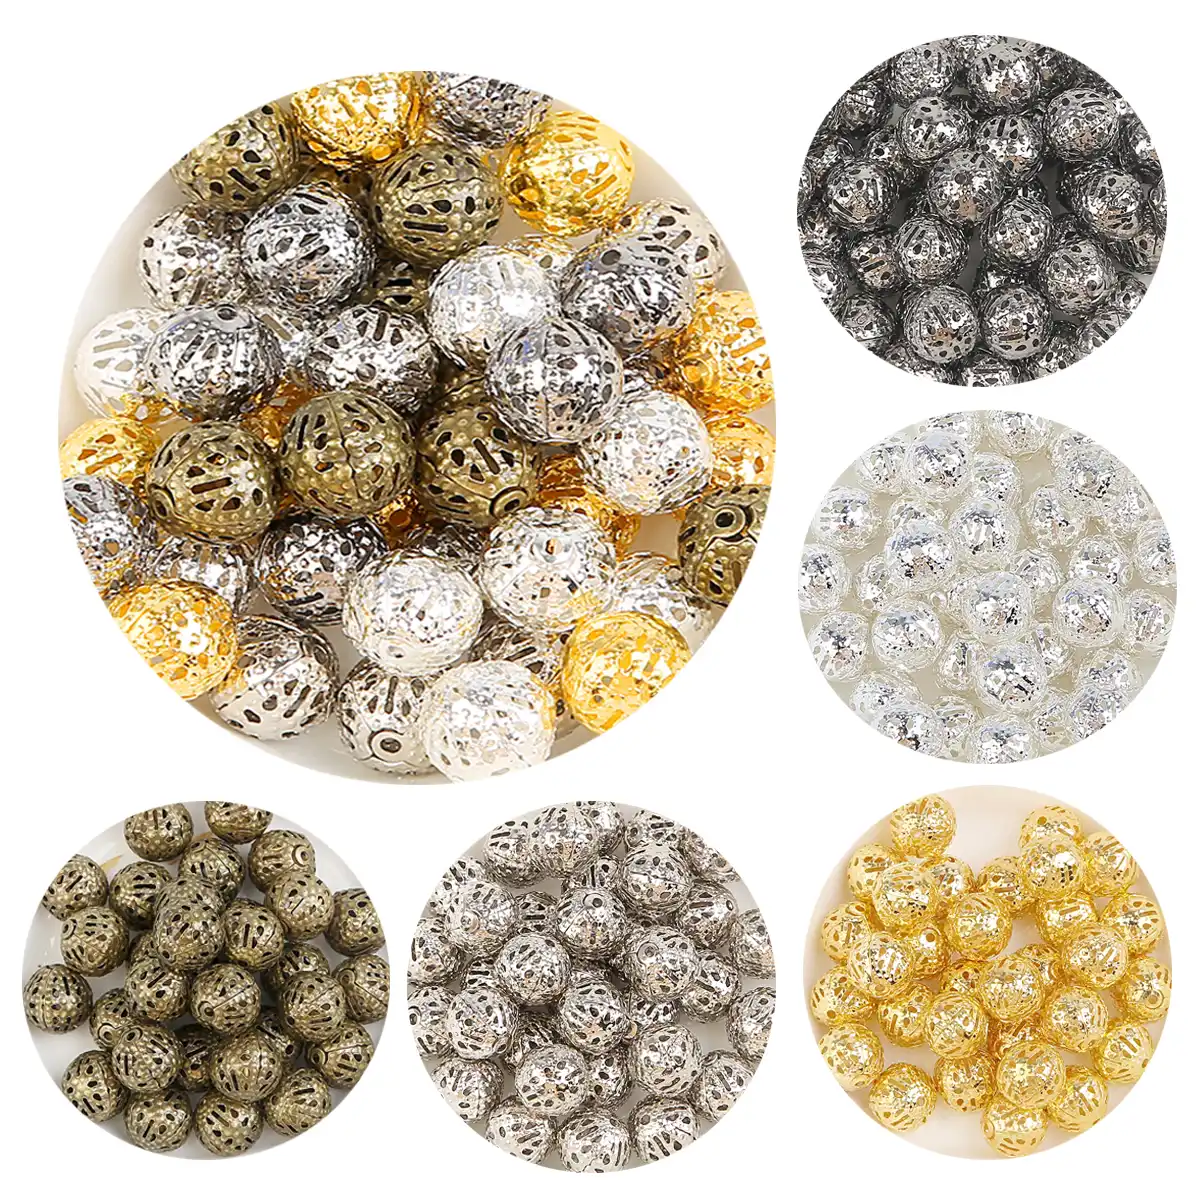 DIY Metal Charm Hollow Flower Ball Loose Spacer Beads Jewelry Findings Making 